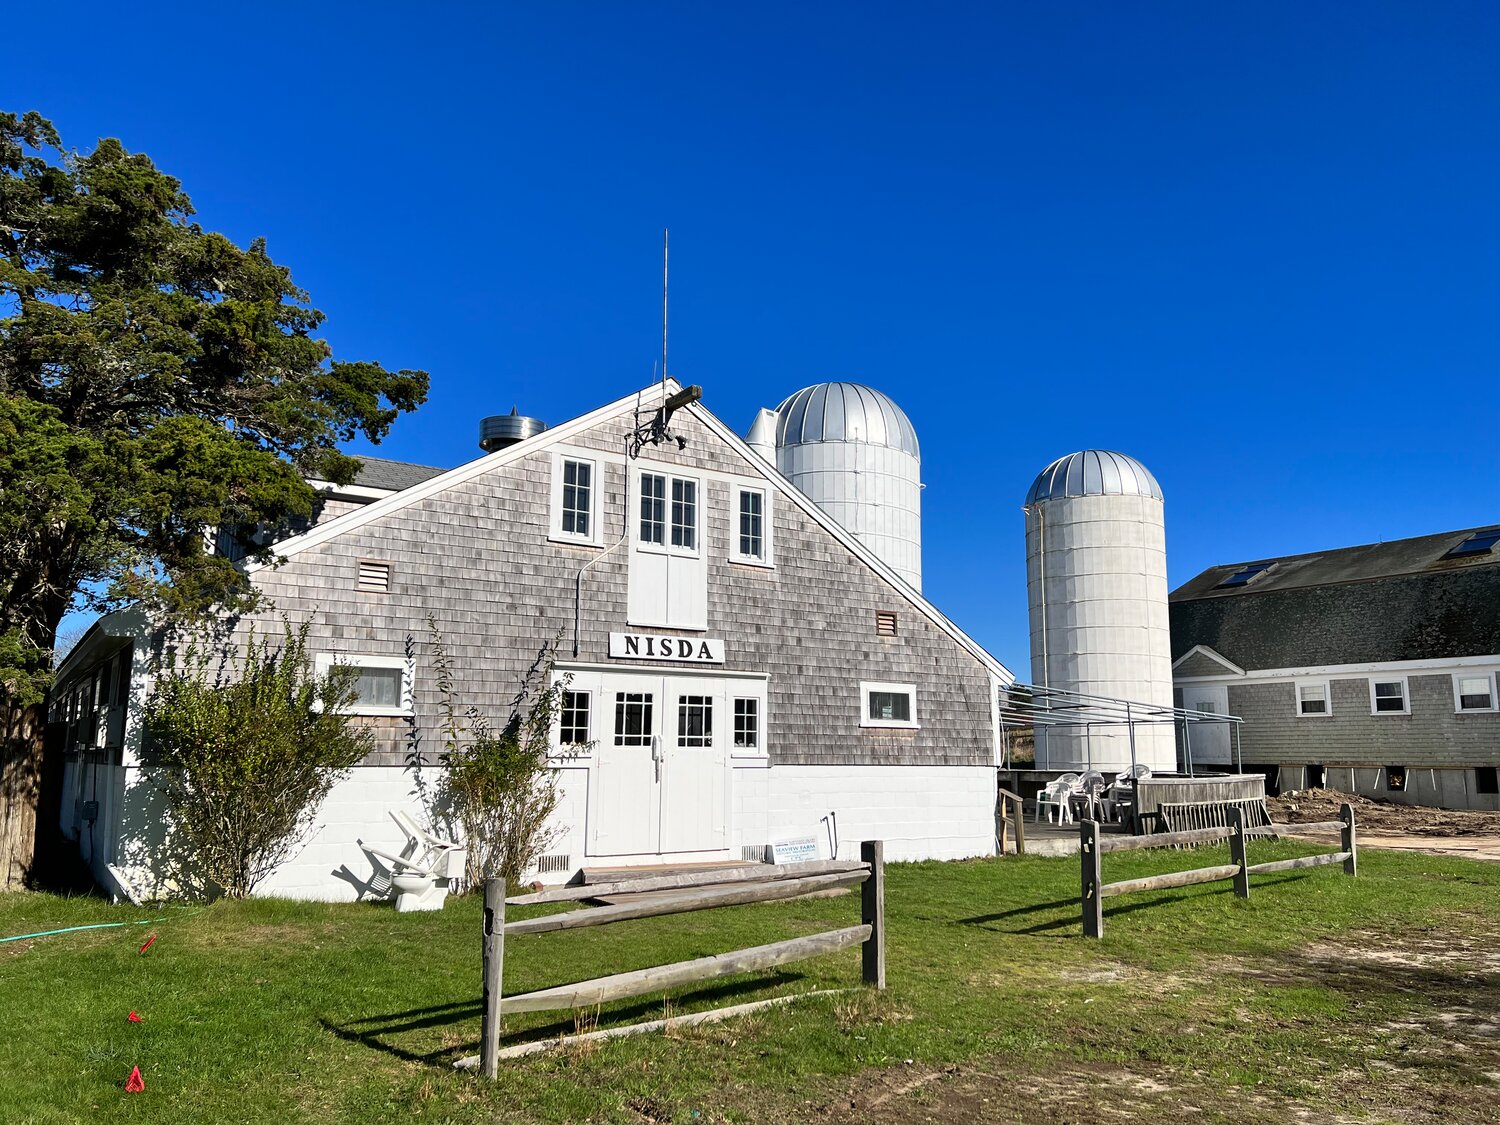 The Nantucket Island School of Design and the Arts’ barns and silos have been restored through grant funding from the Community Preservation Committee.